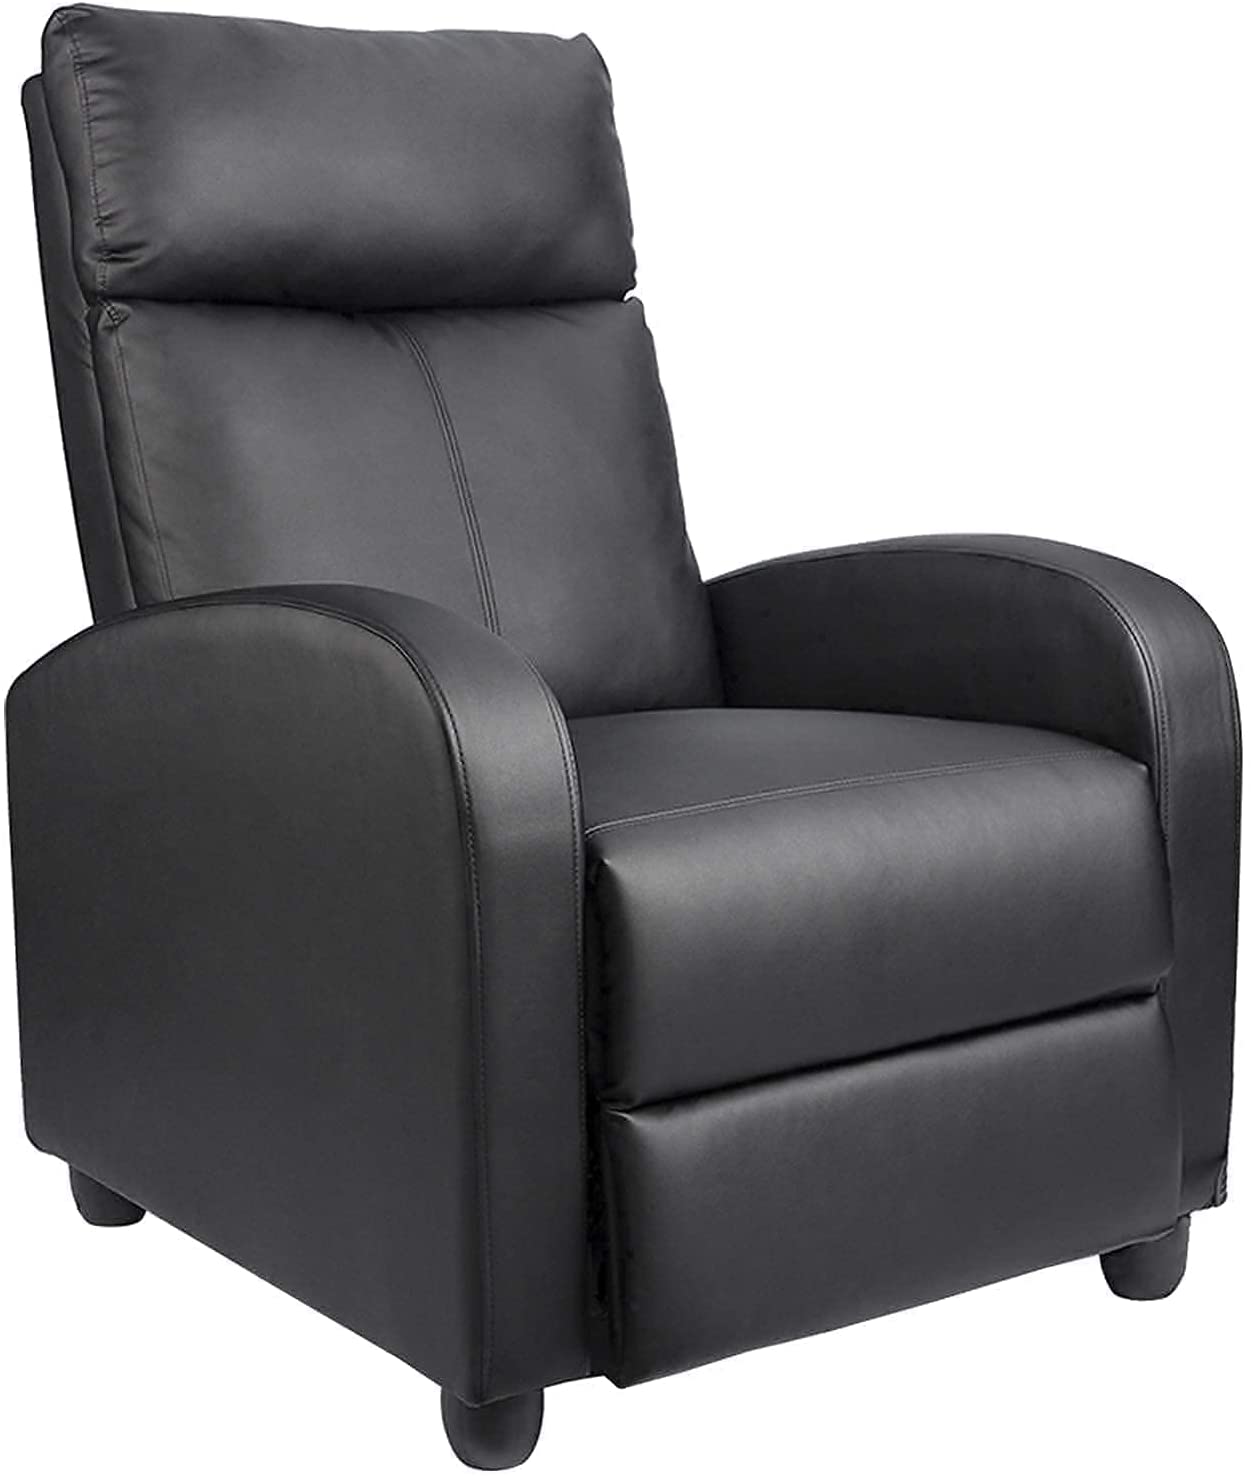 Homall Modern Leather Recliner Theatre Seating